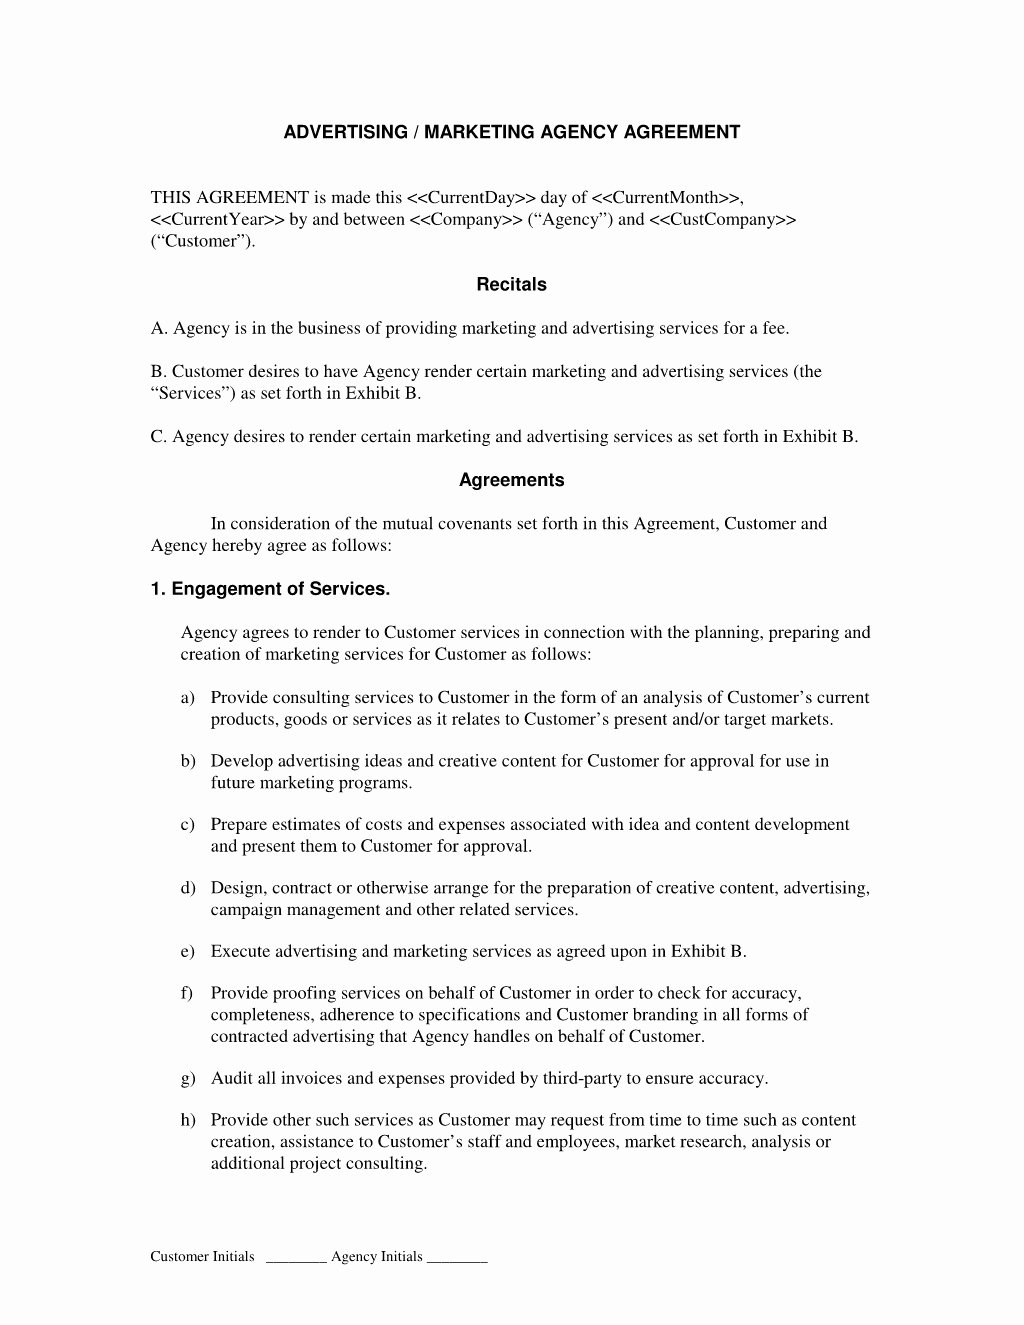 Marketing Agency Agreement Template Inspirational Advertising Agency Contract Template